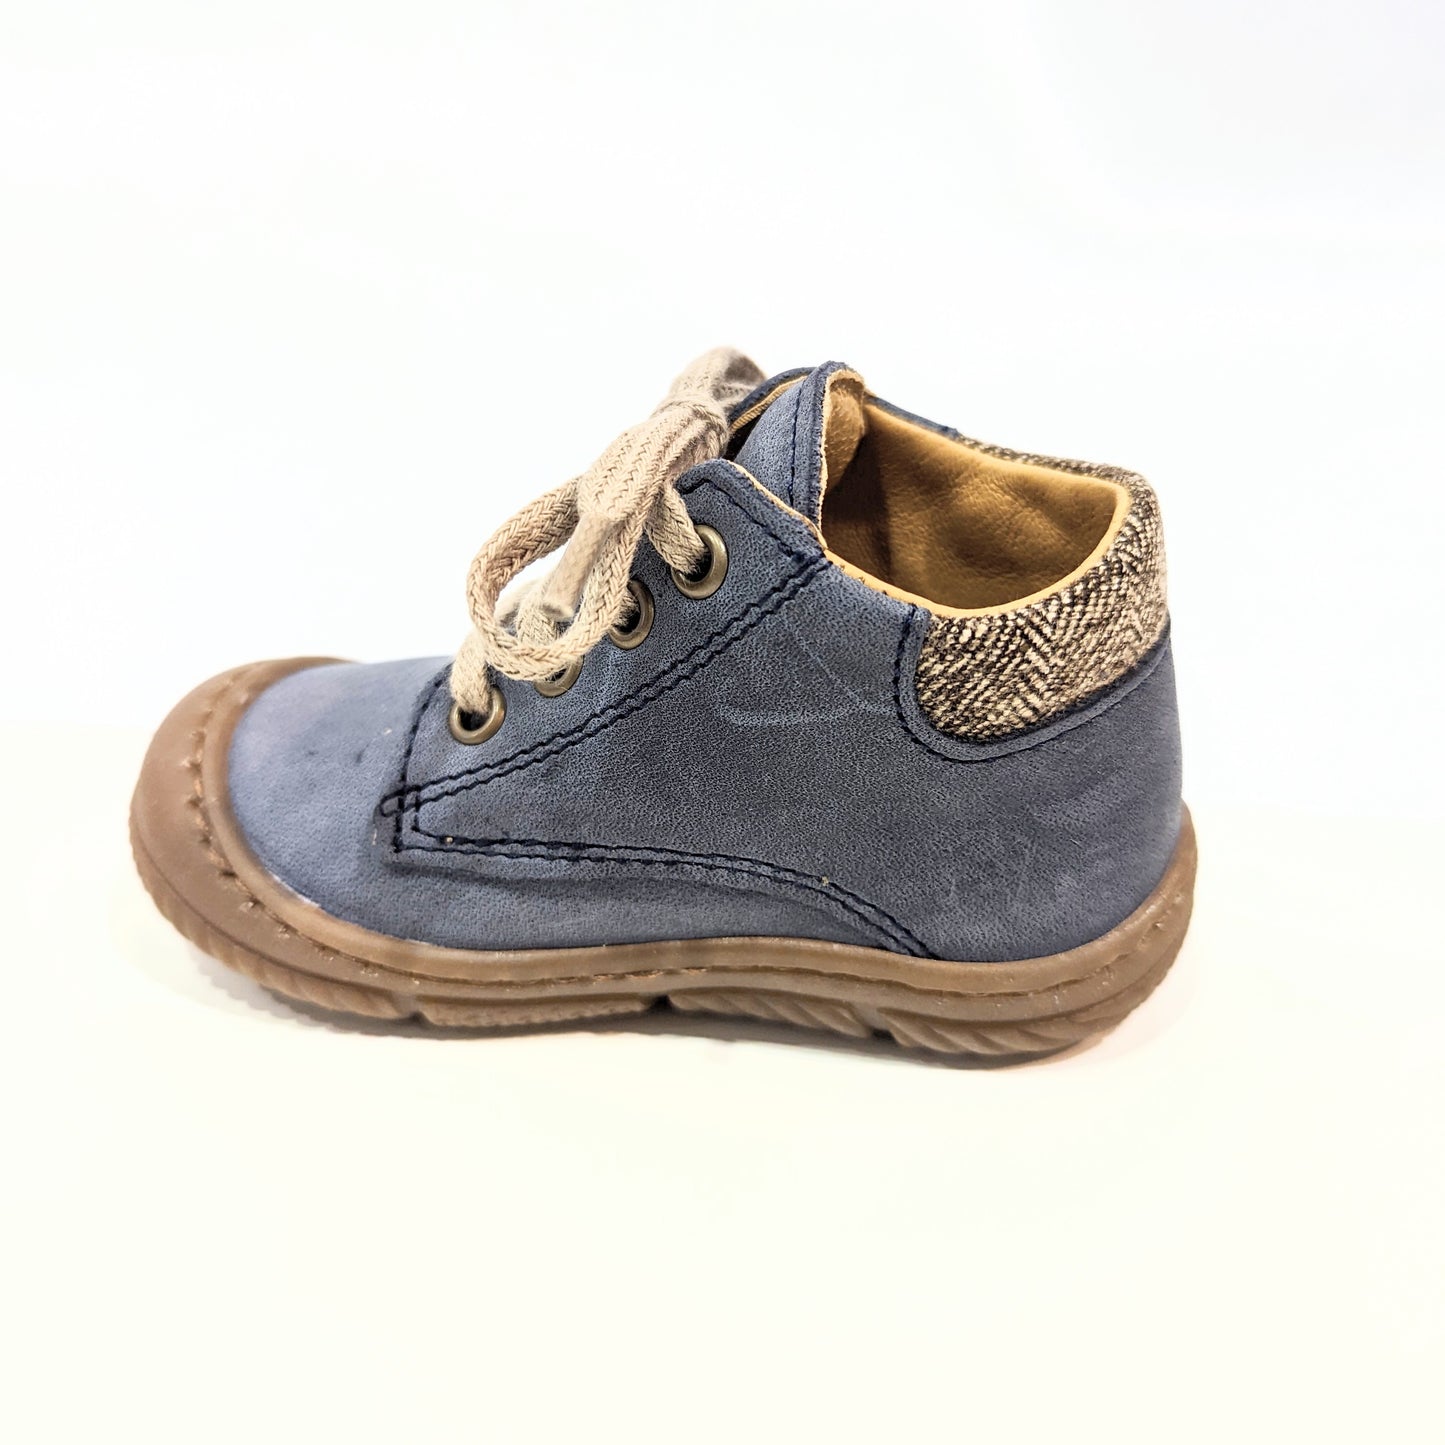 A boys ankle boot by Bopy ,style Jazo, in marine blue with lace and side zip fastening. Left side view.